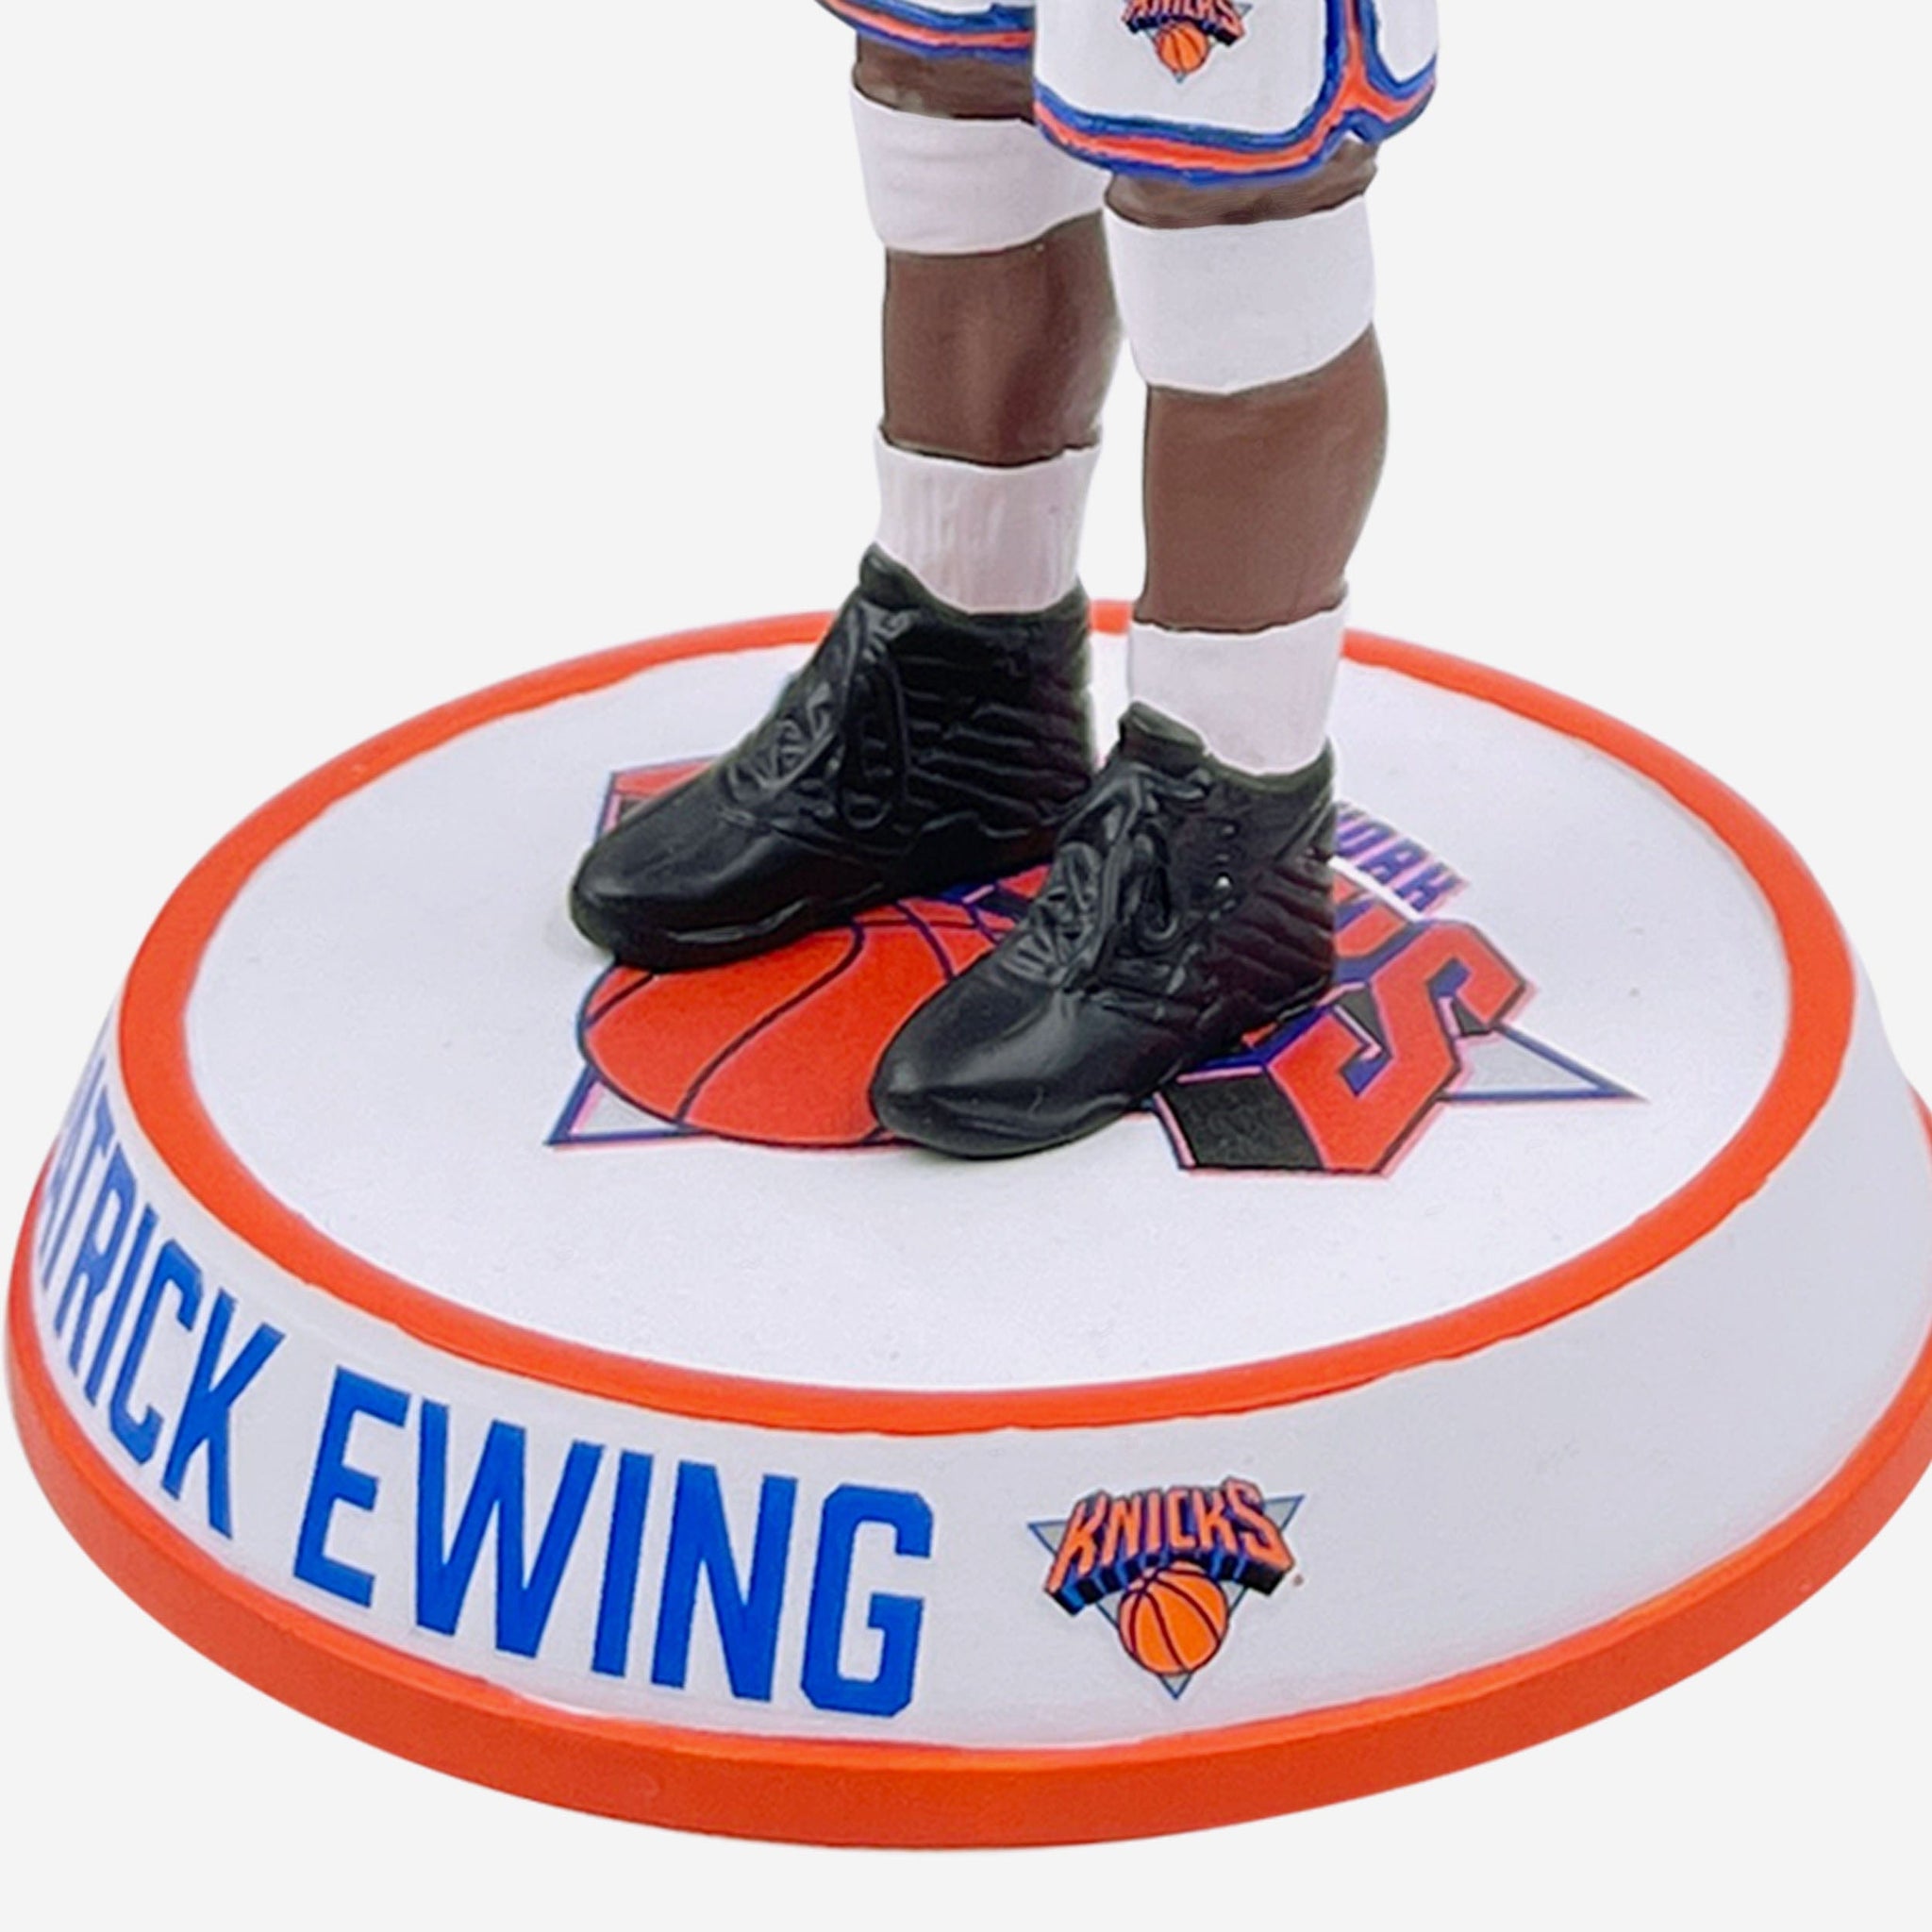 Ewing Athletics Announces Release Dates for St. Patrick's Day Shoes and  More 